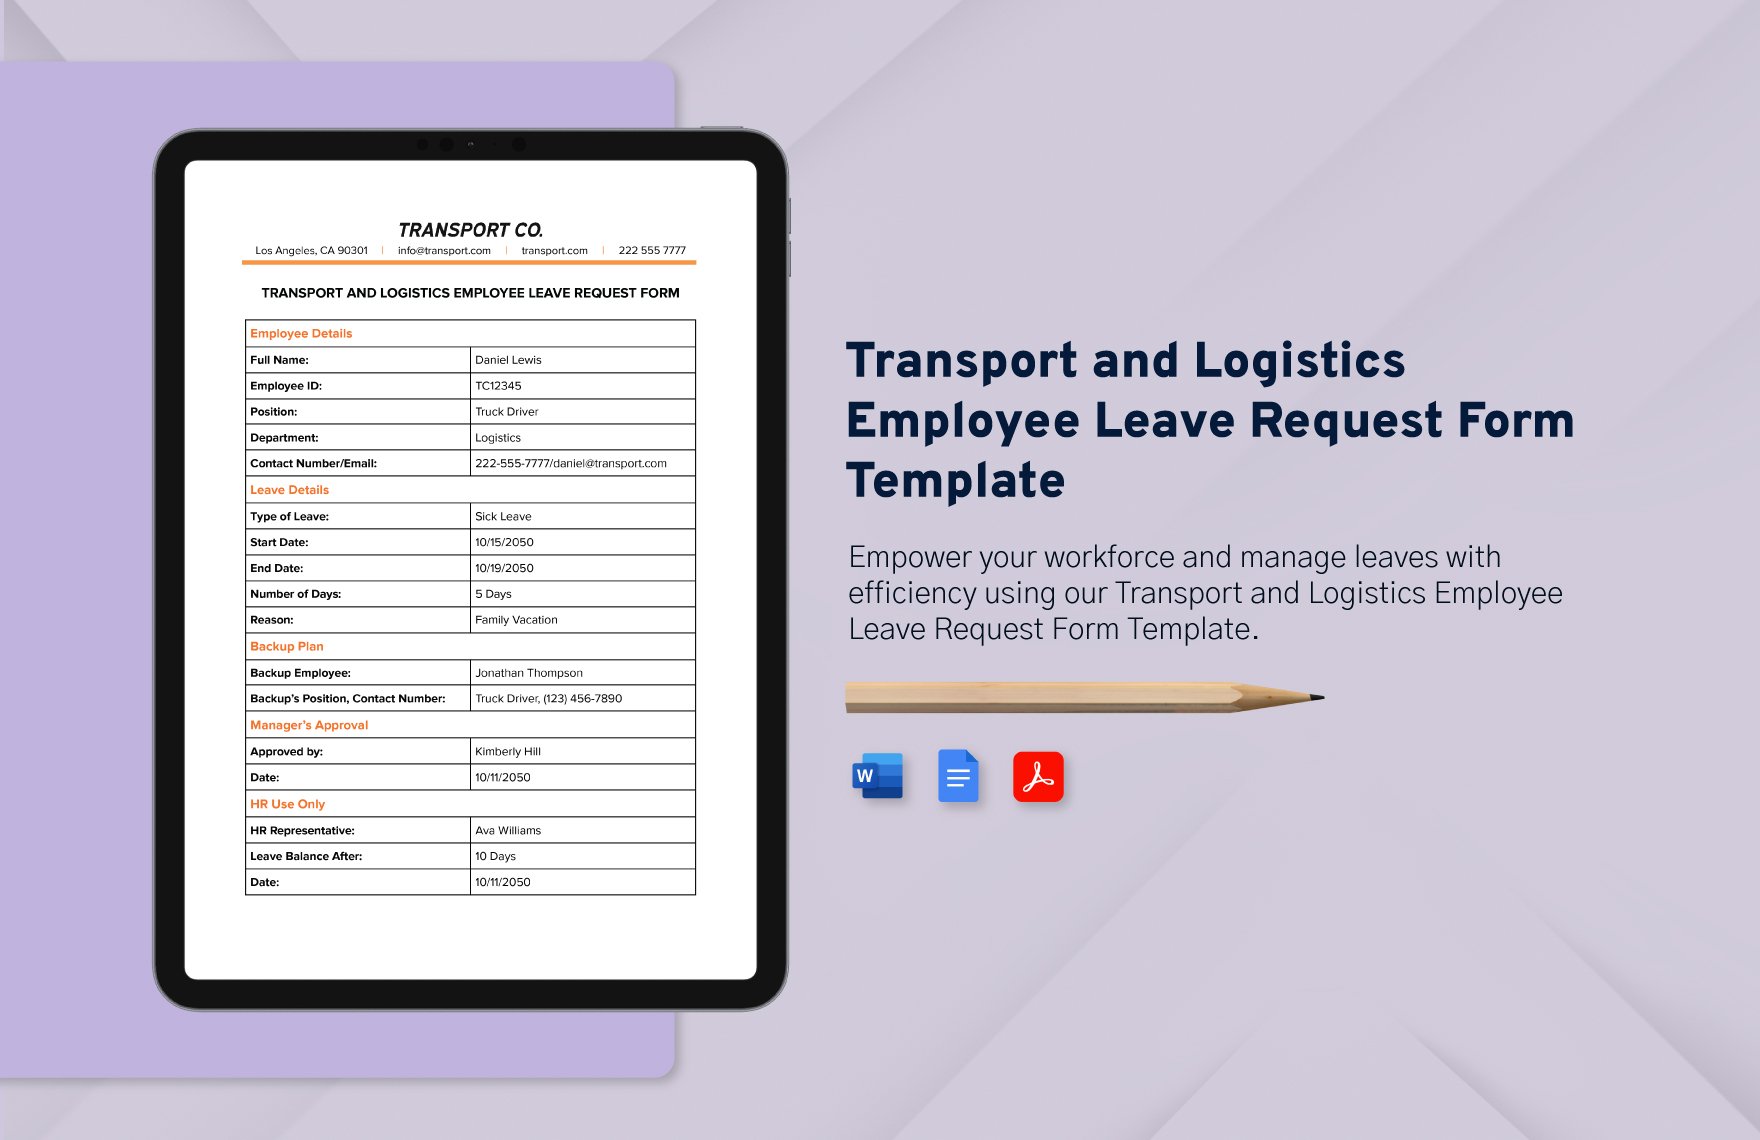 Transport and Logistics Employee Leave Request Form Template